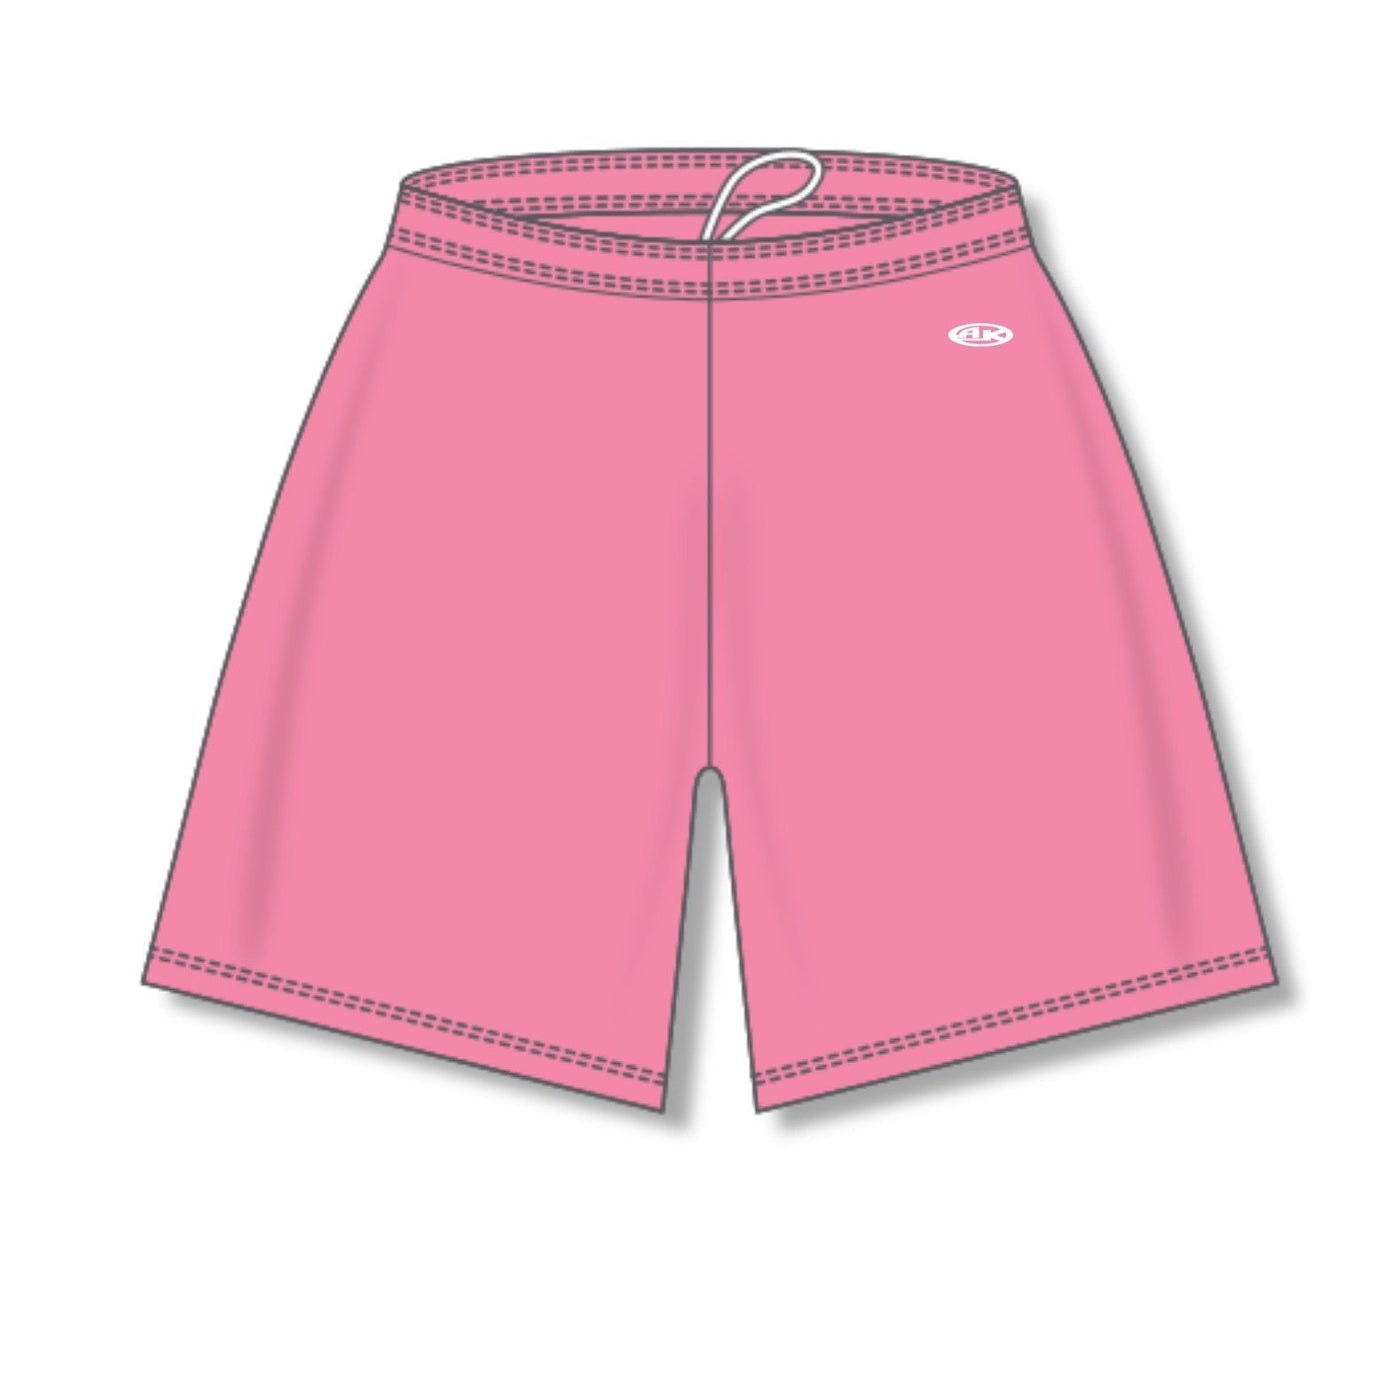 Solid Dry Flex Pink Basketball Shorts